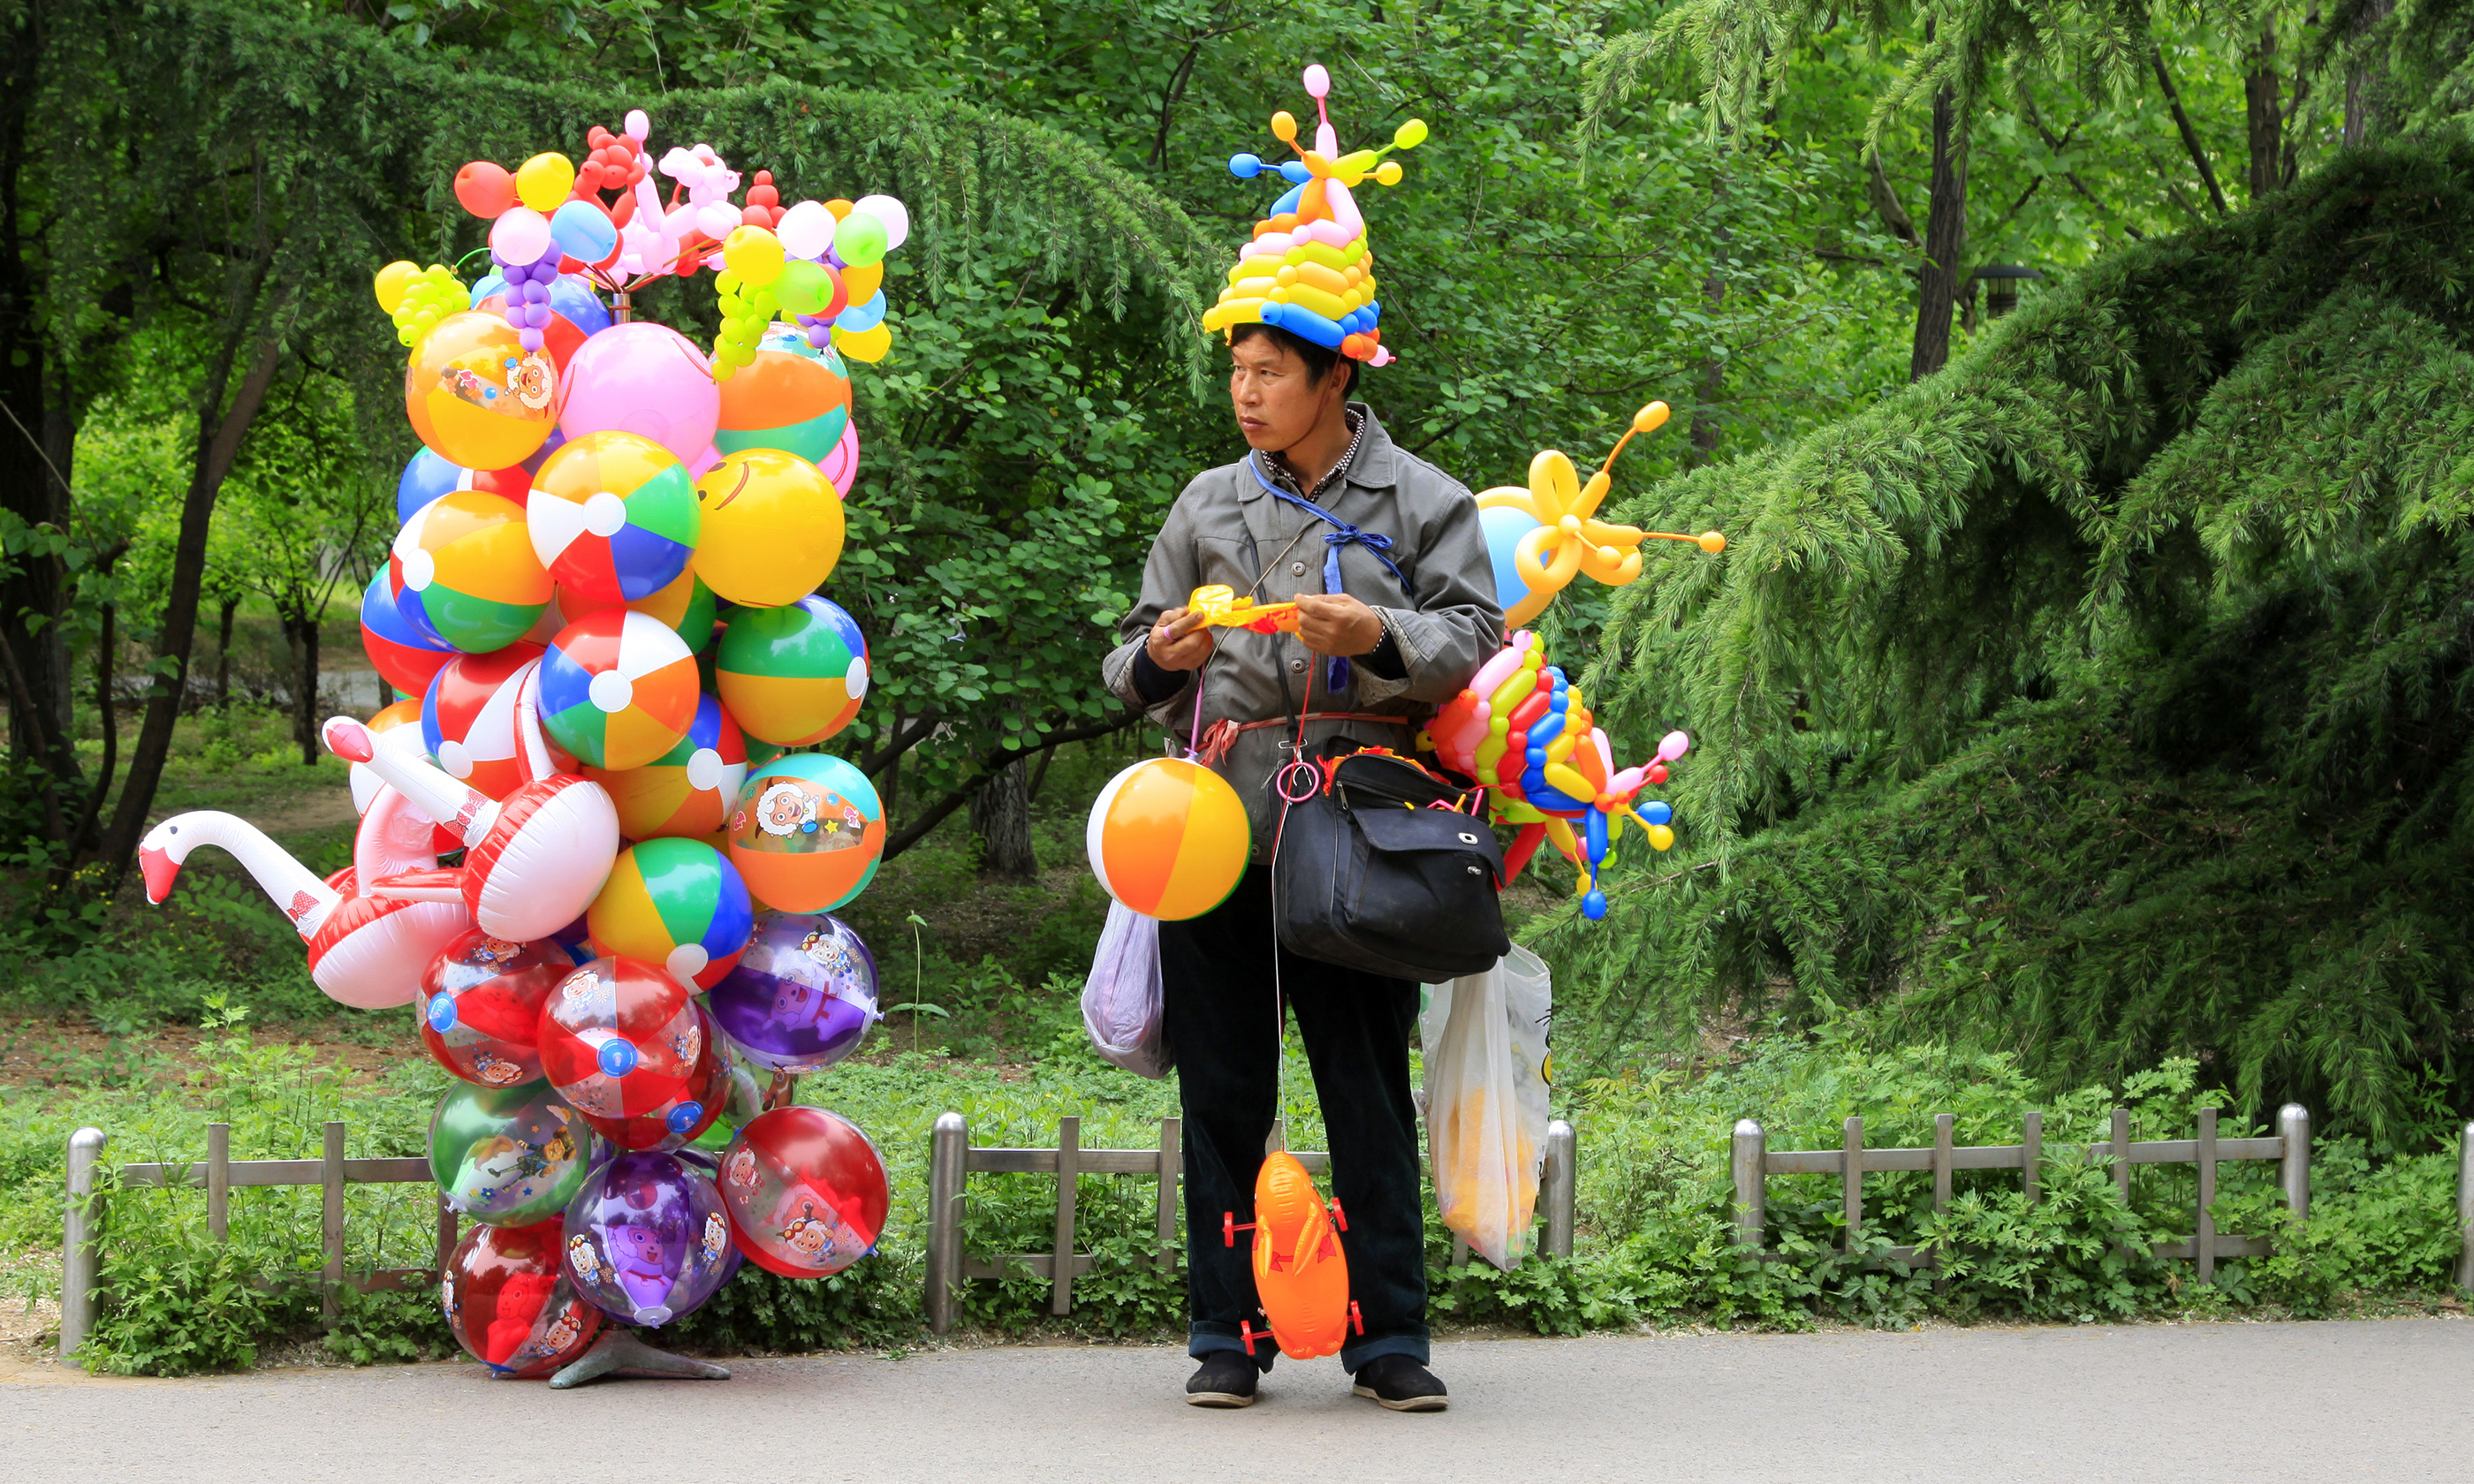 Chinese balloon seller (From Shutterstock.com. See below.)